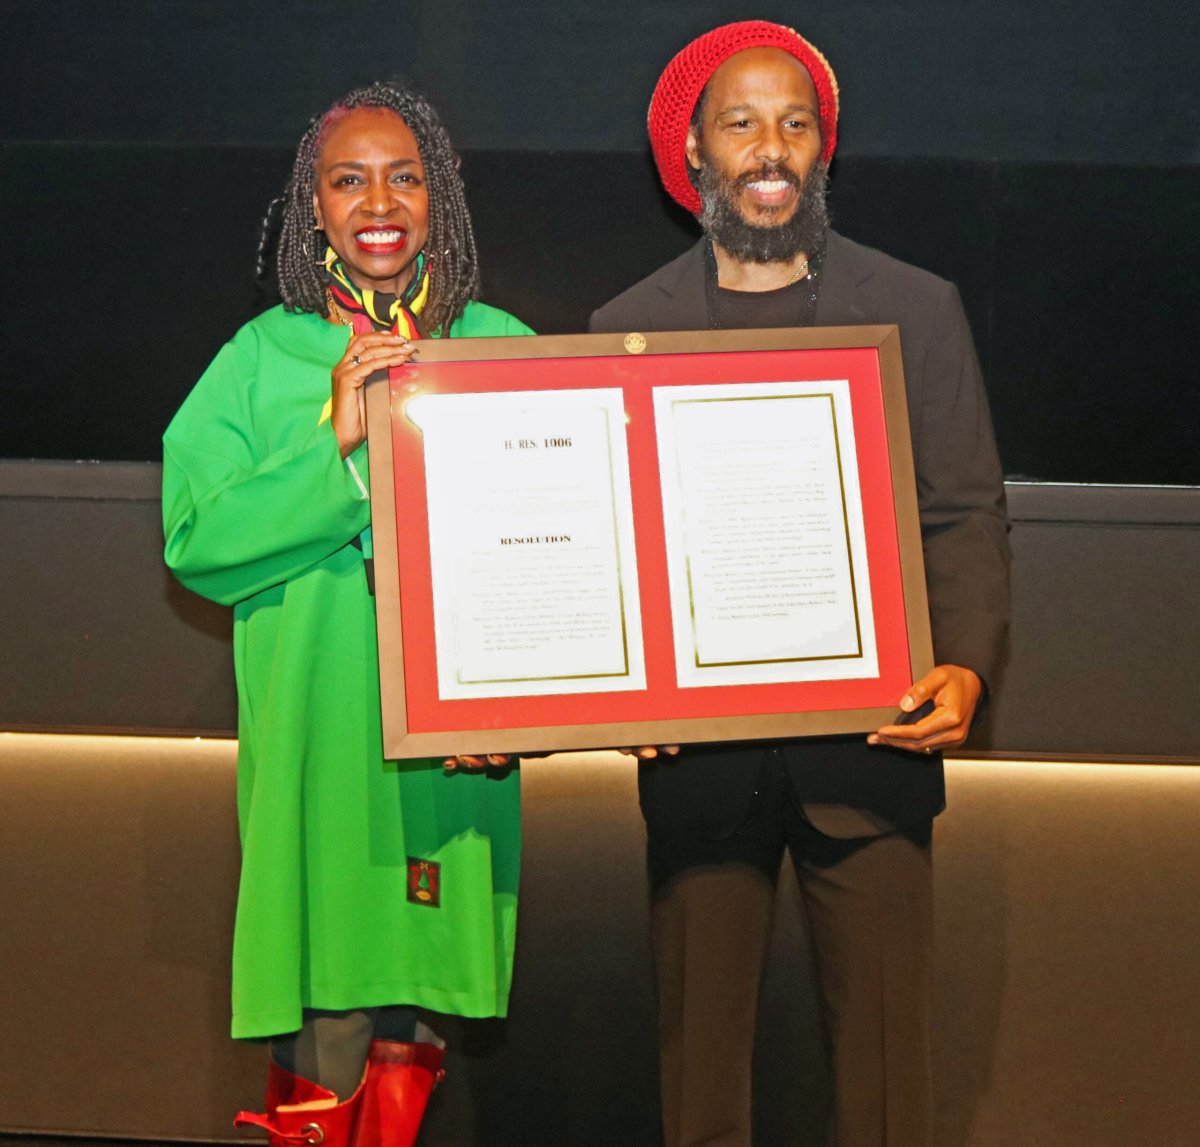 Brooklyn's Congresswoman Yvette D. Clarke presents a copy of the resolution to Ziggy Marley in Washington DC at a special screening of the “Bob Marley One Love Biopic.”